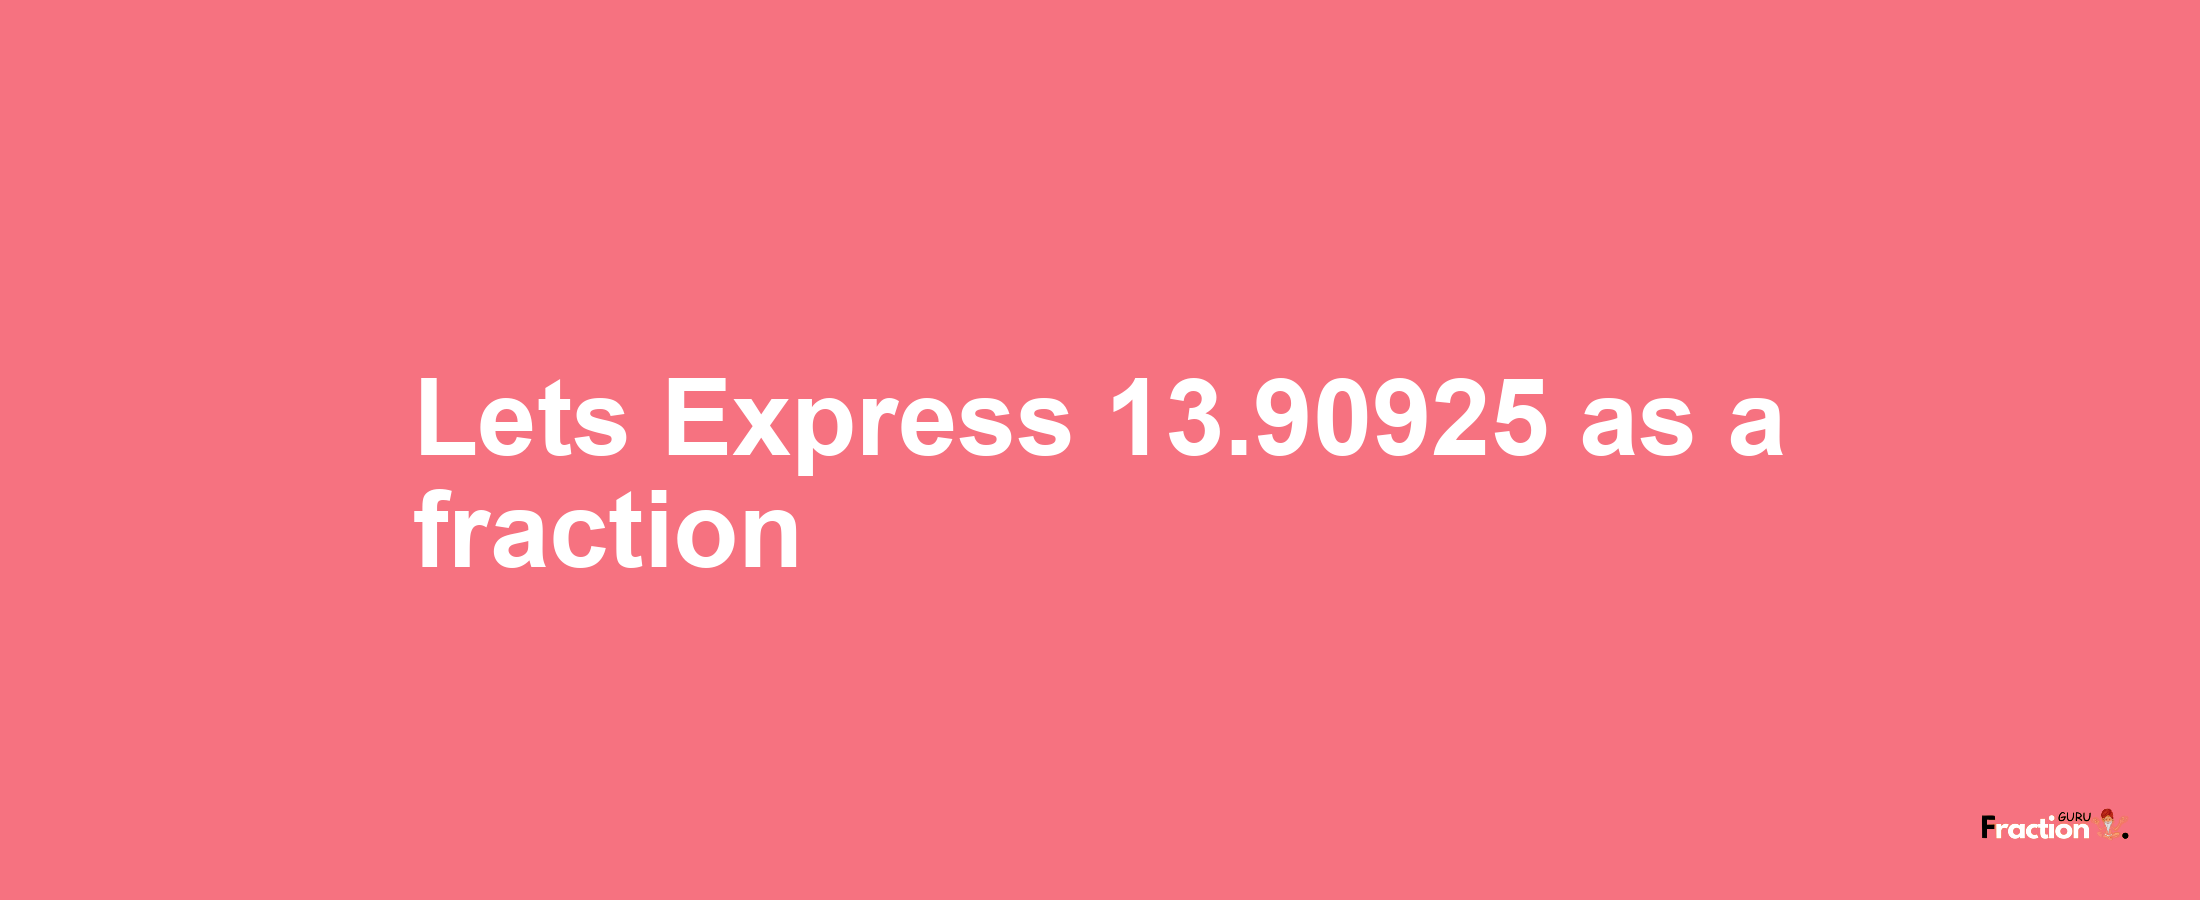 Lets Express 13.90925 as afraction